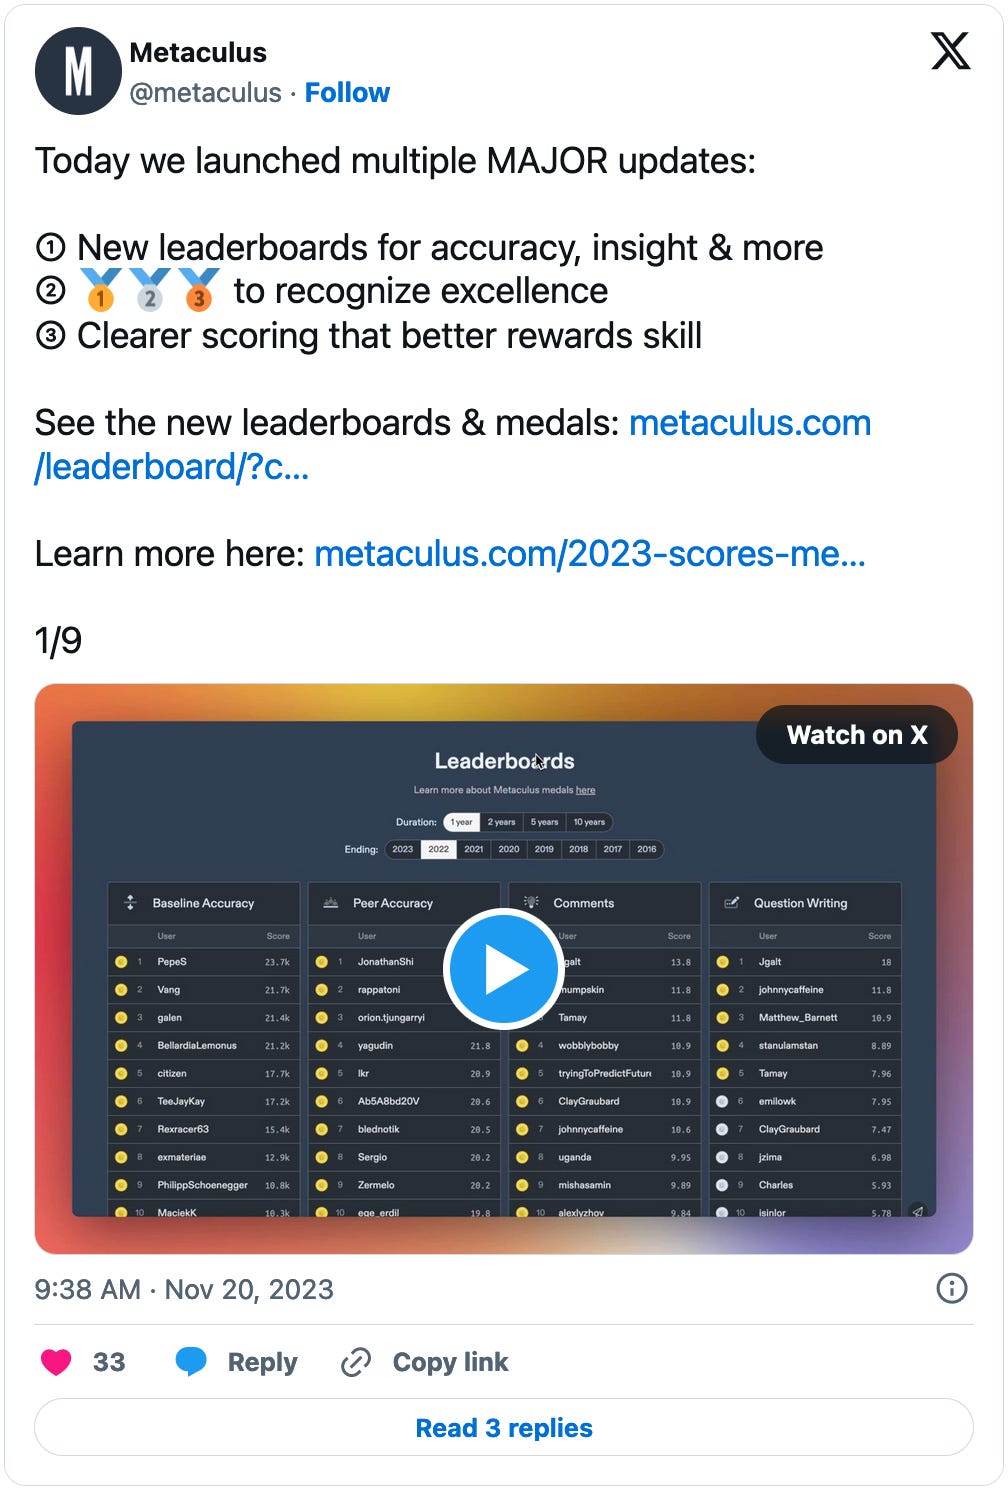 November 20, 2023 tweet from Metaculus reading, "Today we launched multiple MAJOR updates:  ① New leaderboards for accuracy, insight & more ② 🥇🥈🥉 to recognize excellence ③ Clearer scoring that better rewards skill" with a video attached.